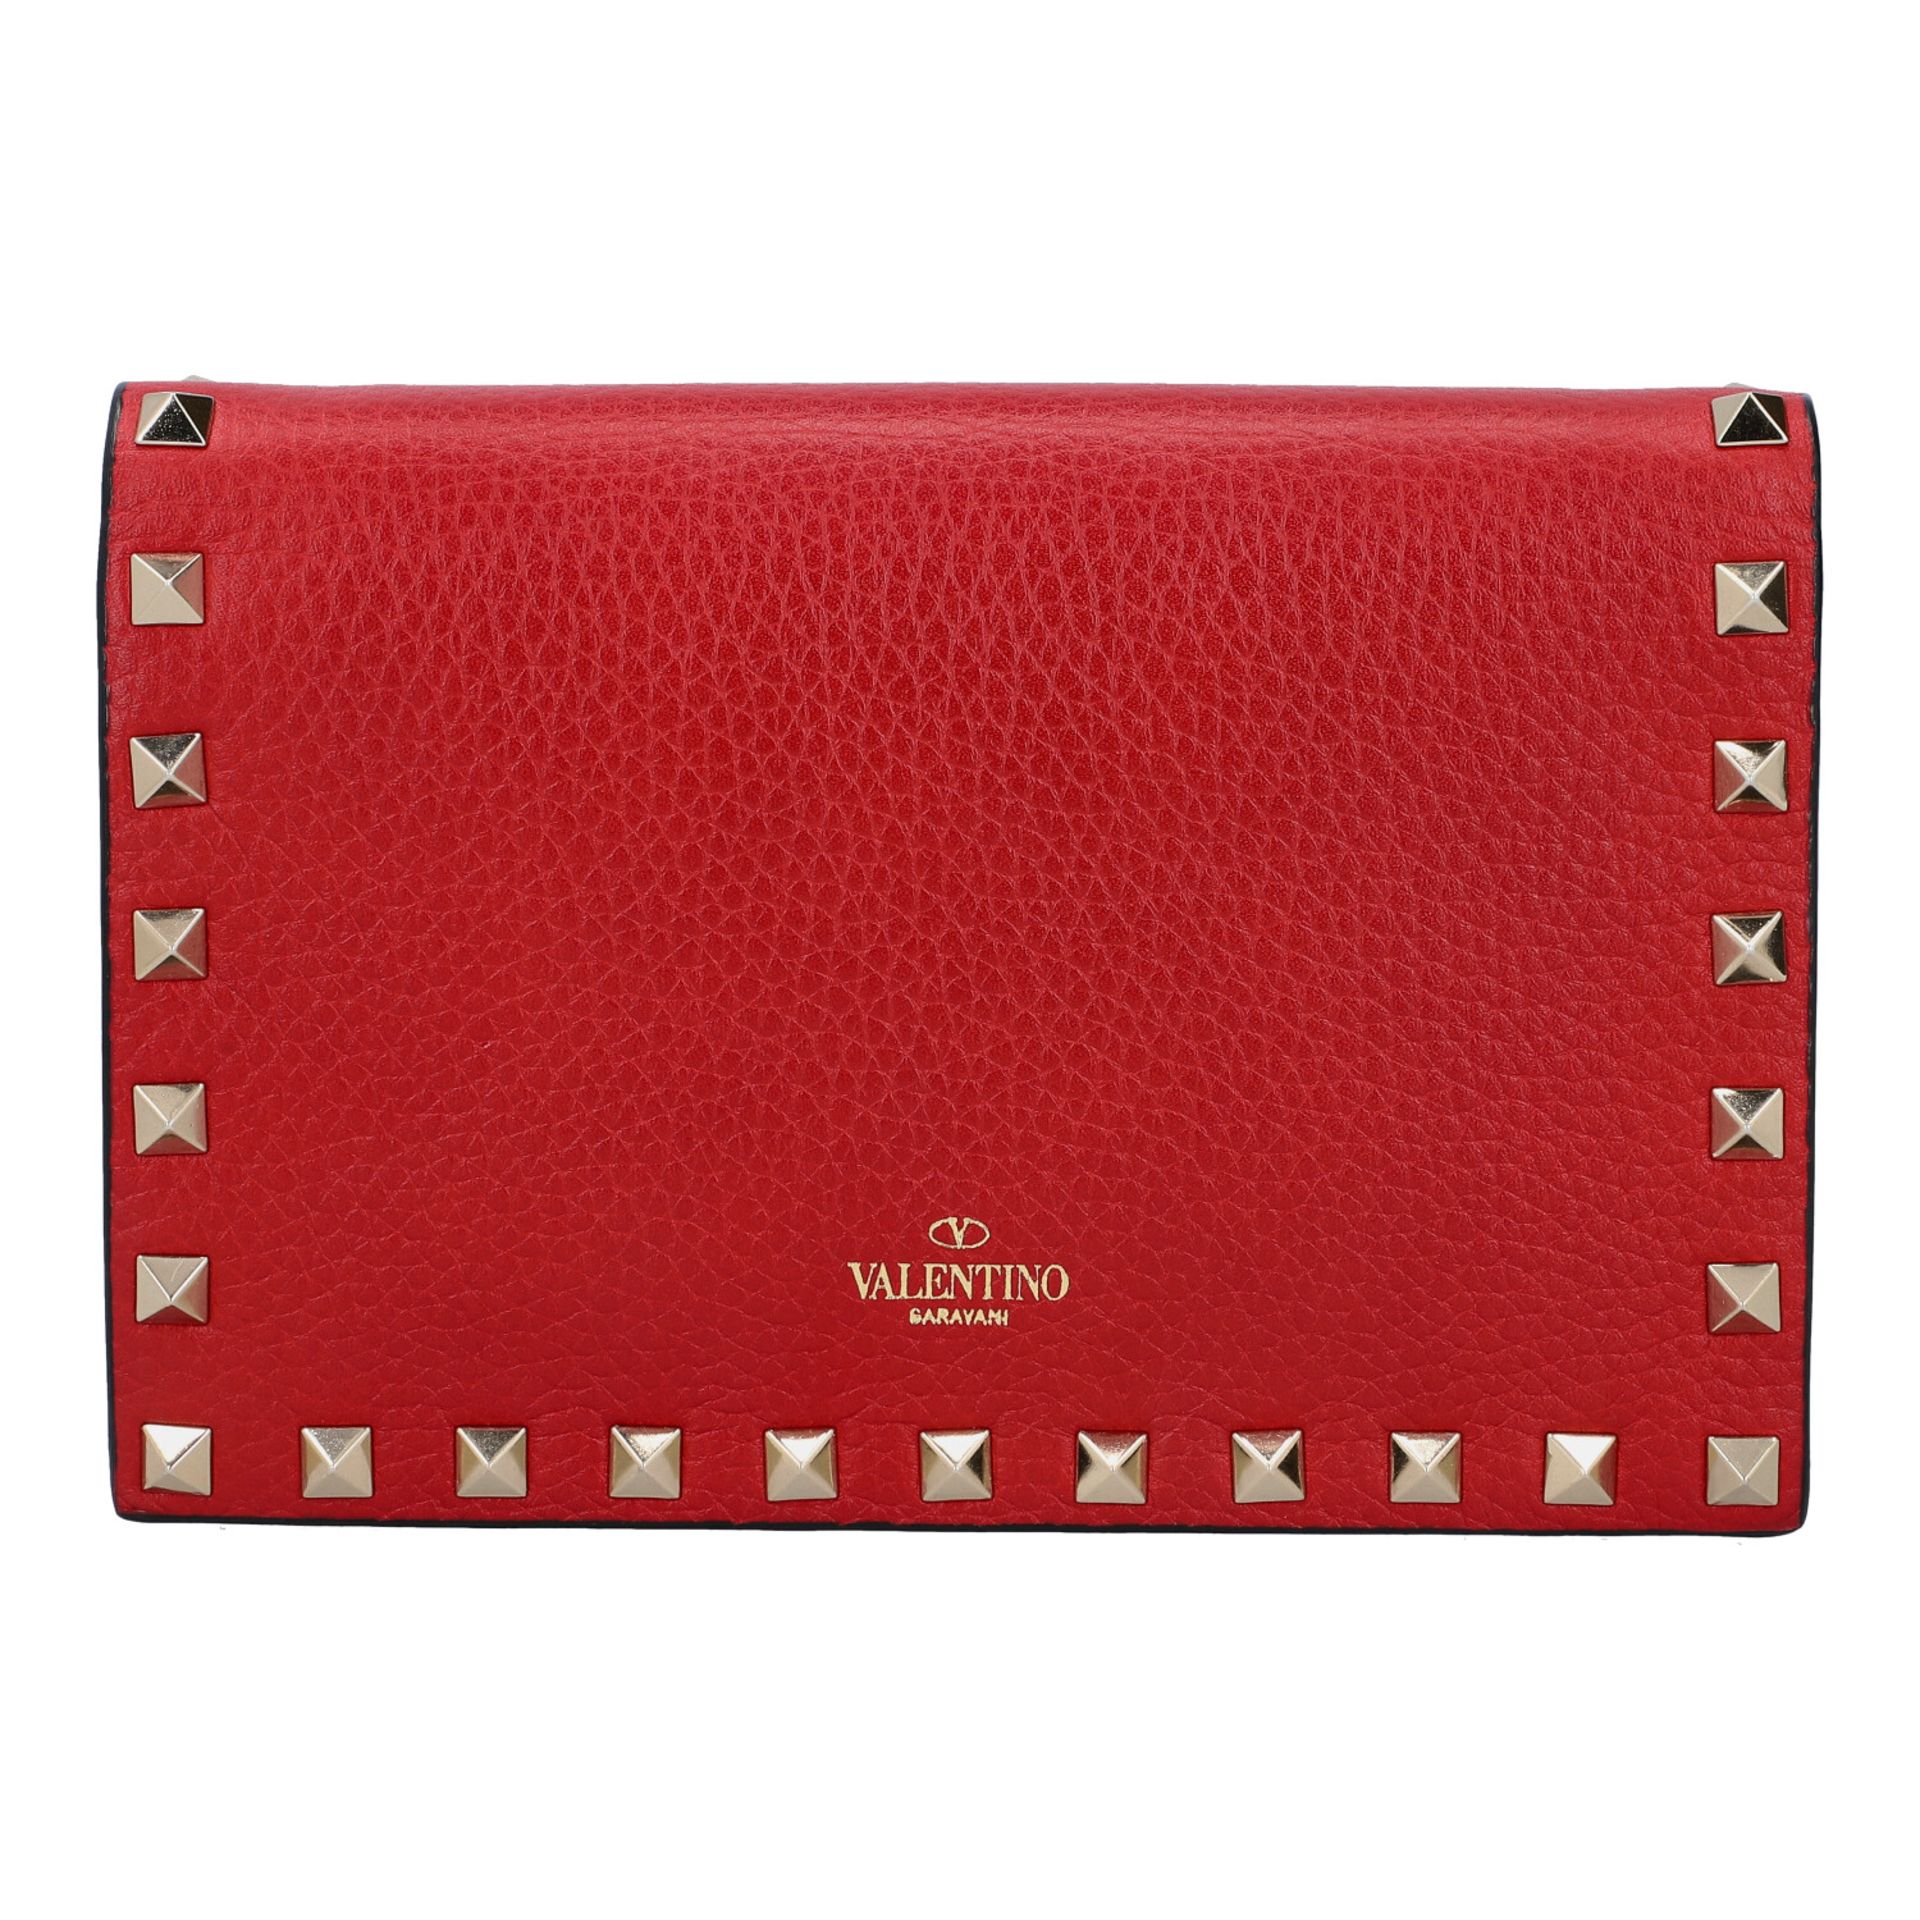 VALENTINO Clutch "WALLET WITH CHAIN STRAP", NP.: ca. 800,-€. - Image 4 of 8